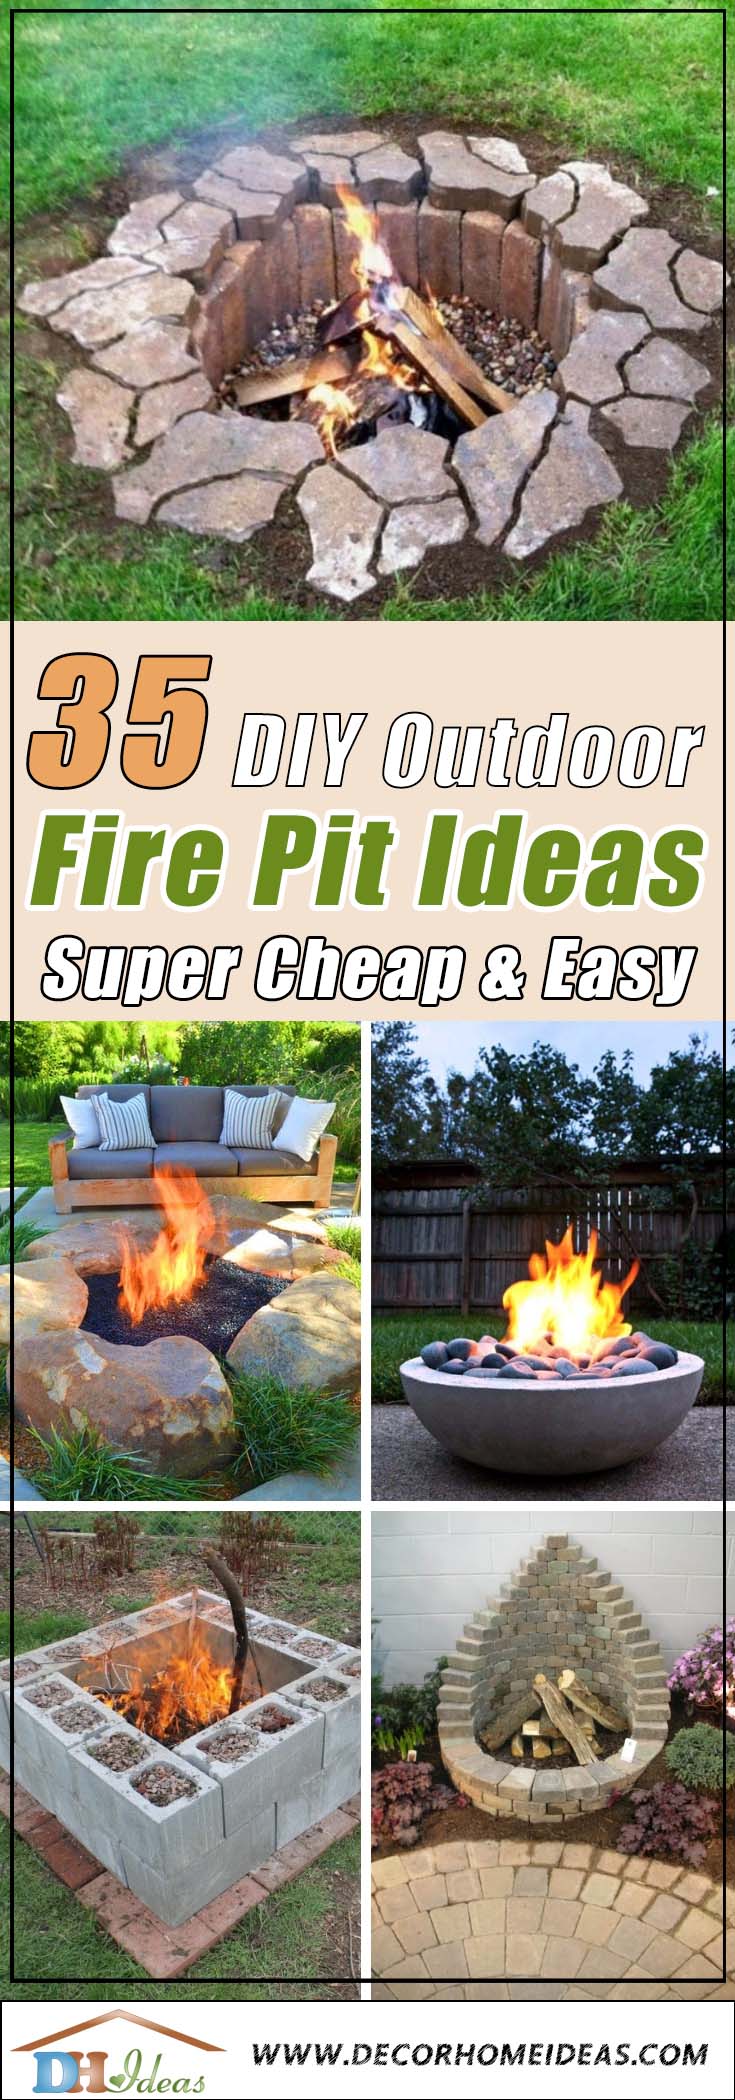 35 Easy To Do Fire Pit Ideas And Designs That Are Also Inexpensive - Diy Propane Fire Pit Ideas